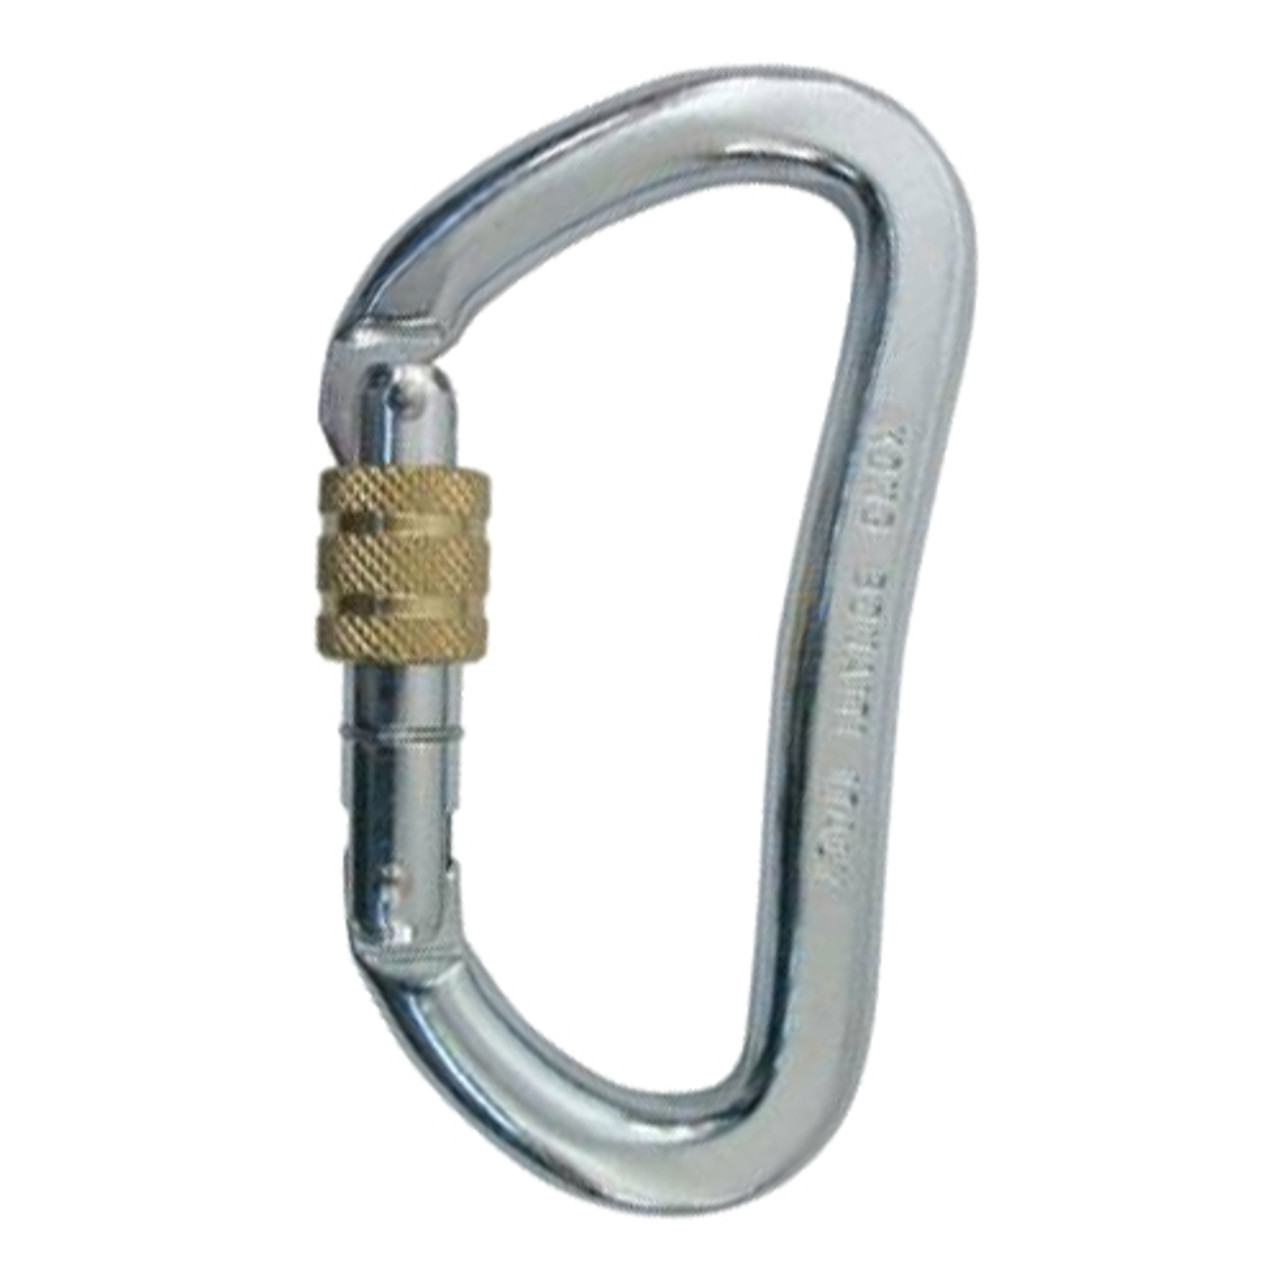 Details about   Heavy Duty D-Ring Screw Lock Outdoor Rock Climbing Clip Hook Carabiner Hardware 